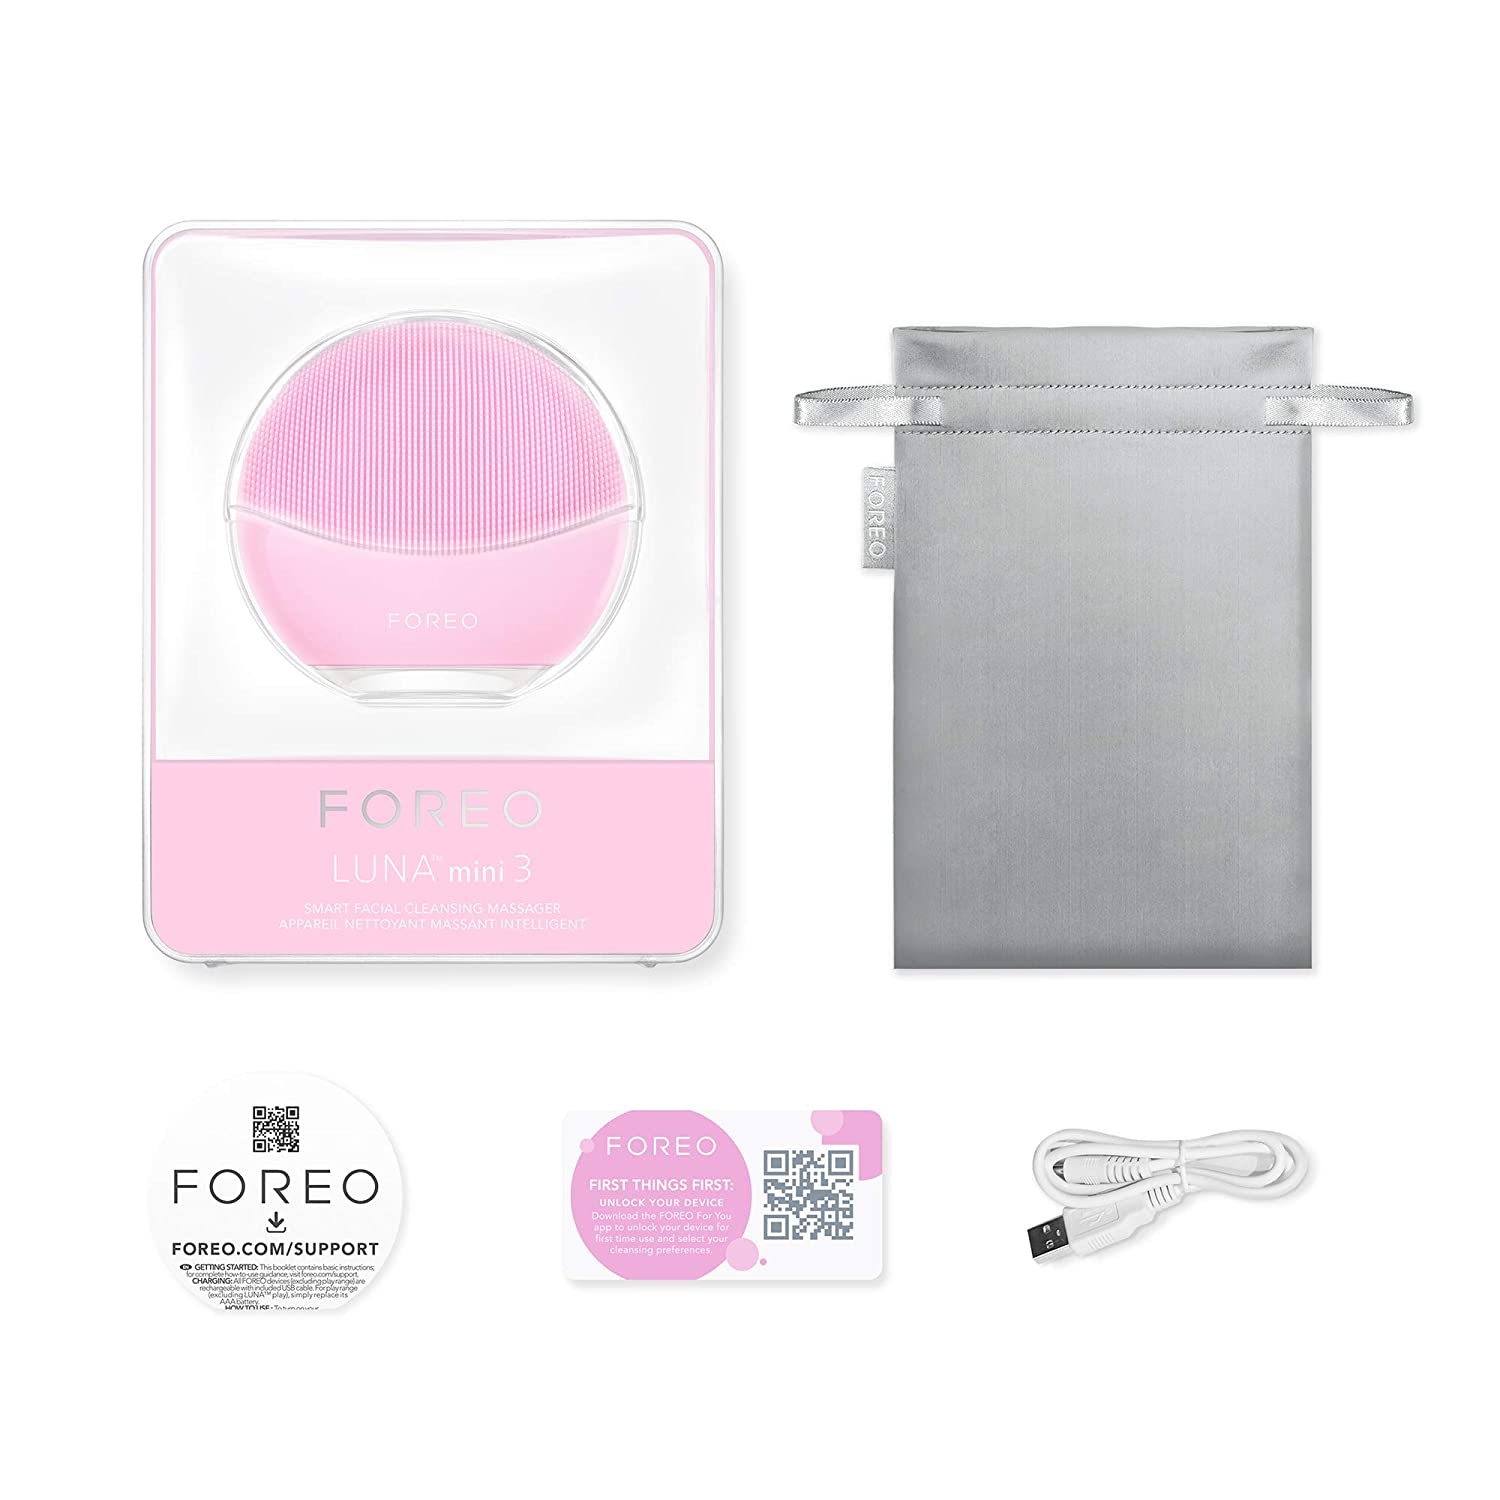 FOREO LUNA mini T-Sonic Facial Cleansing Device - PINK color : Buy Online  at Best Price in KSA - Souq is now : Beauty